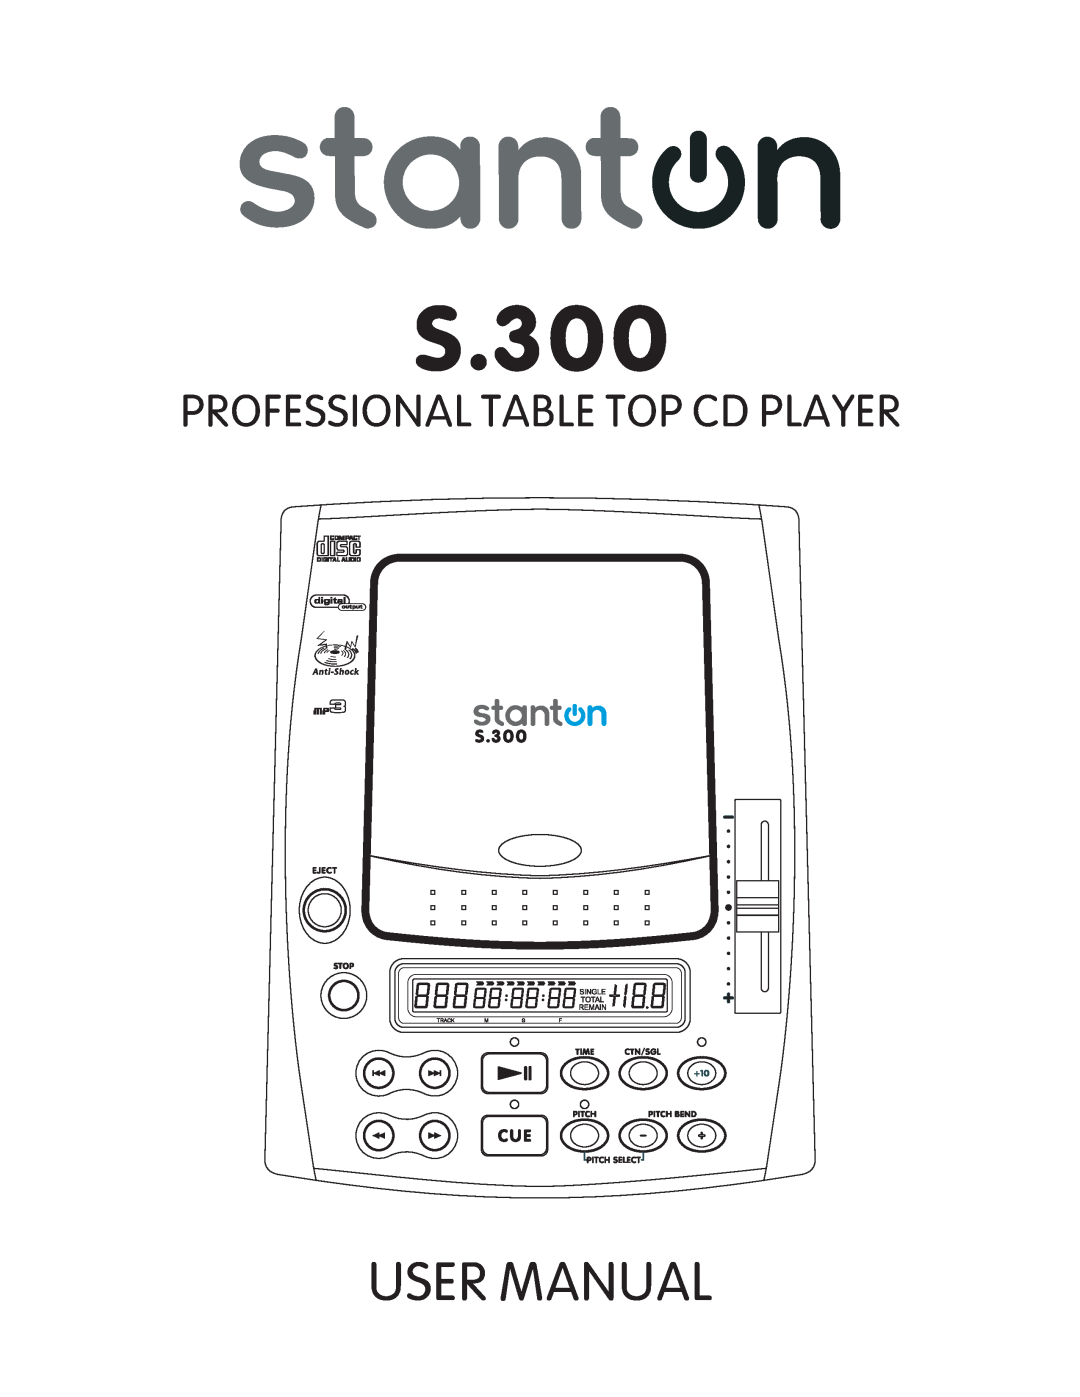 Stanton S.300 user manual Professional Table Top Cd Player 